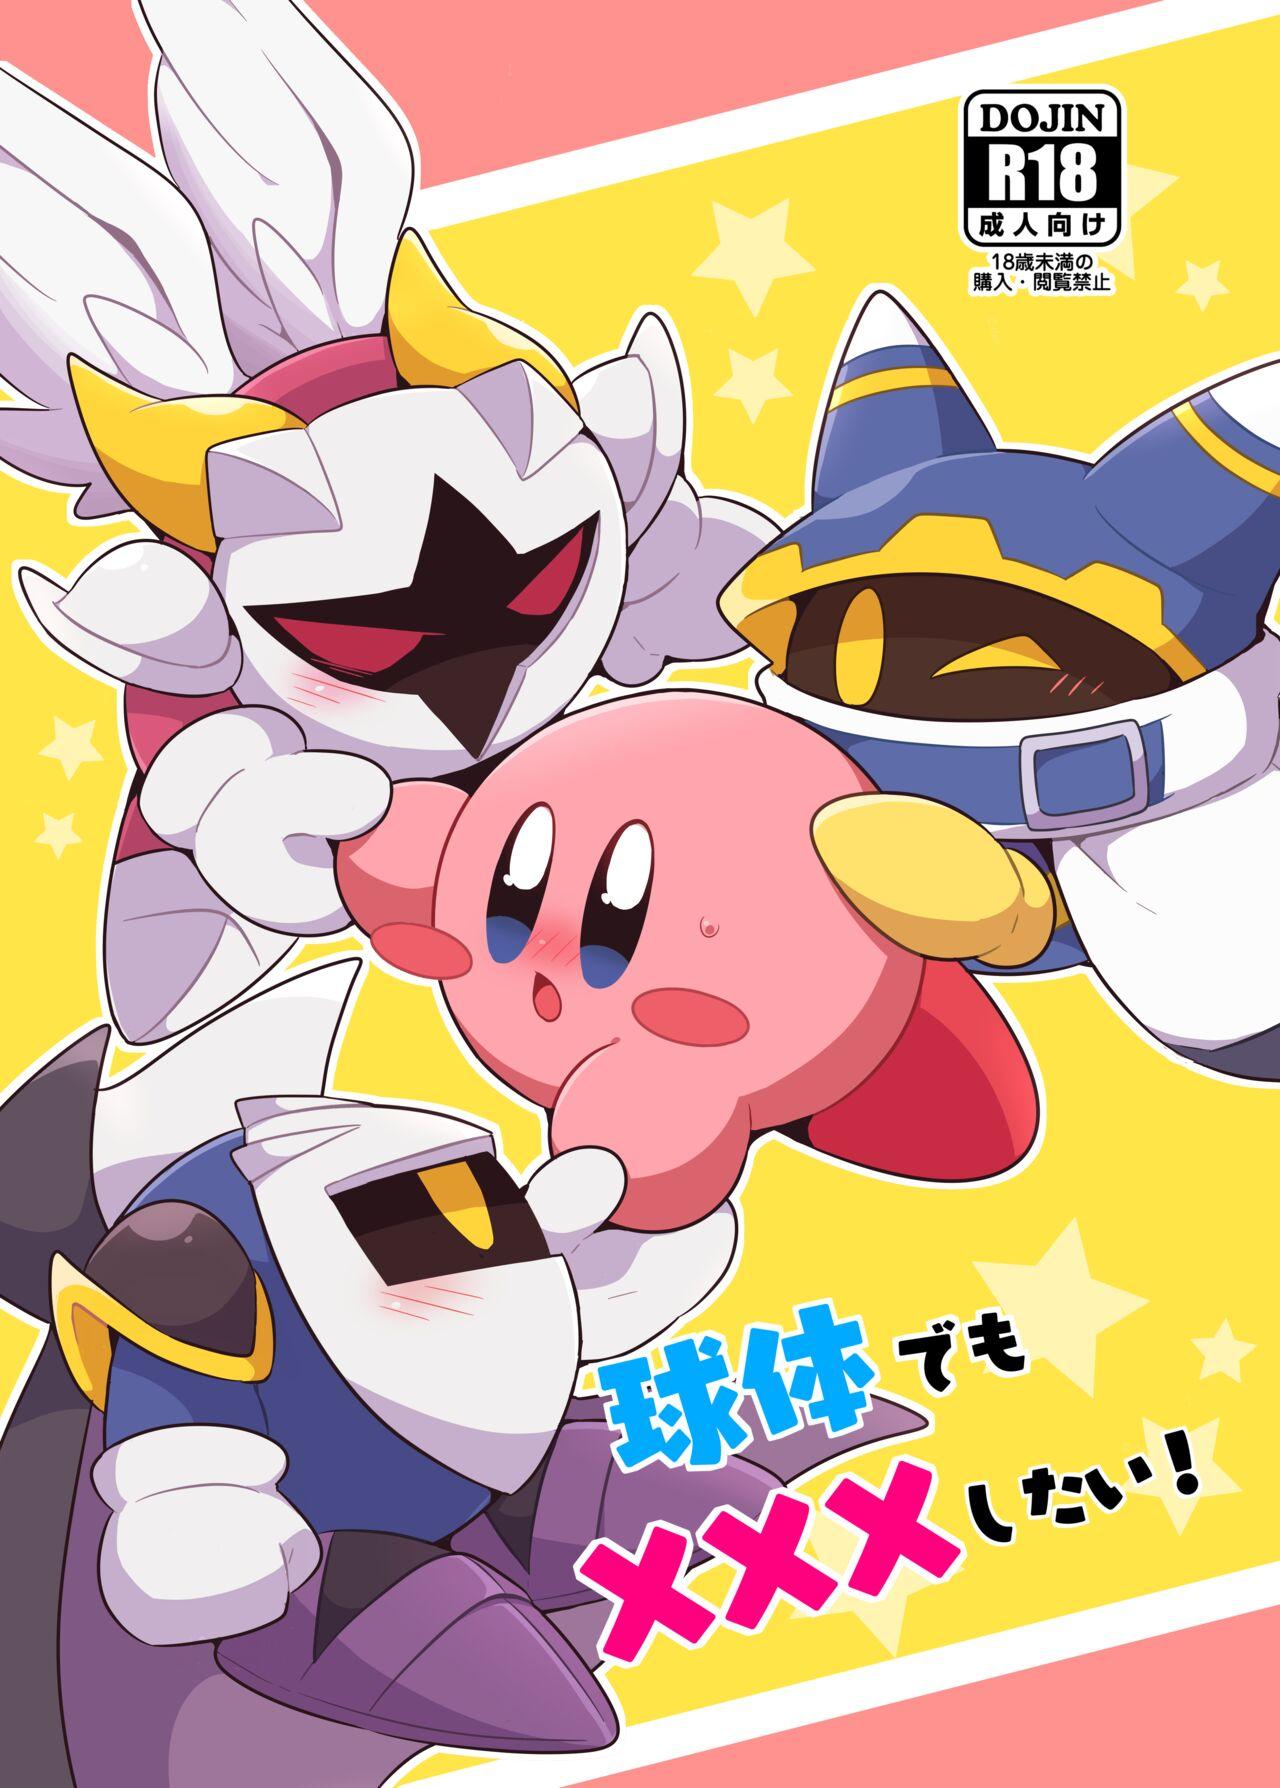 Magrinha I Want to Do XXX Even For Spheres! - Kirby Bra - Picture 1